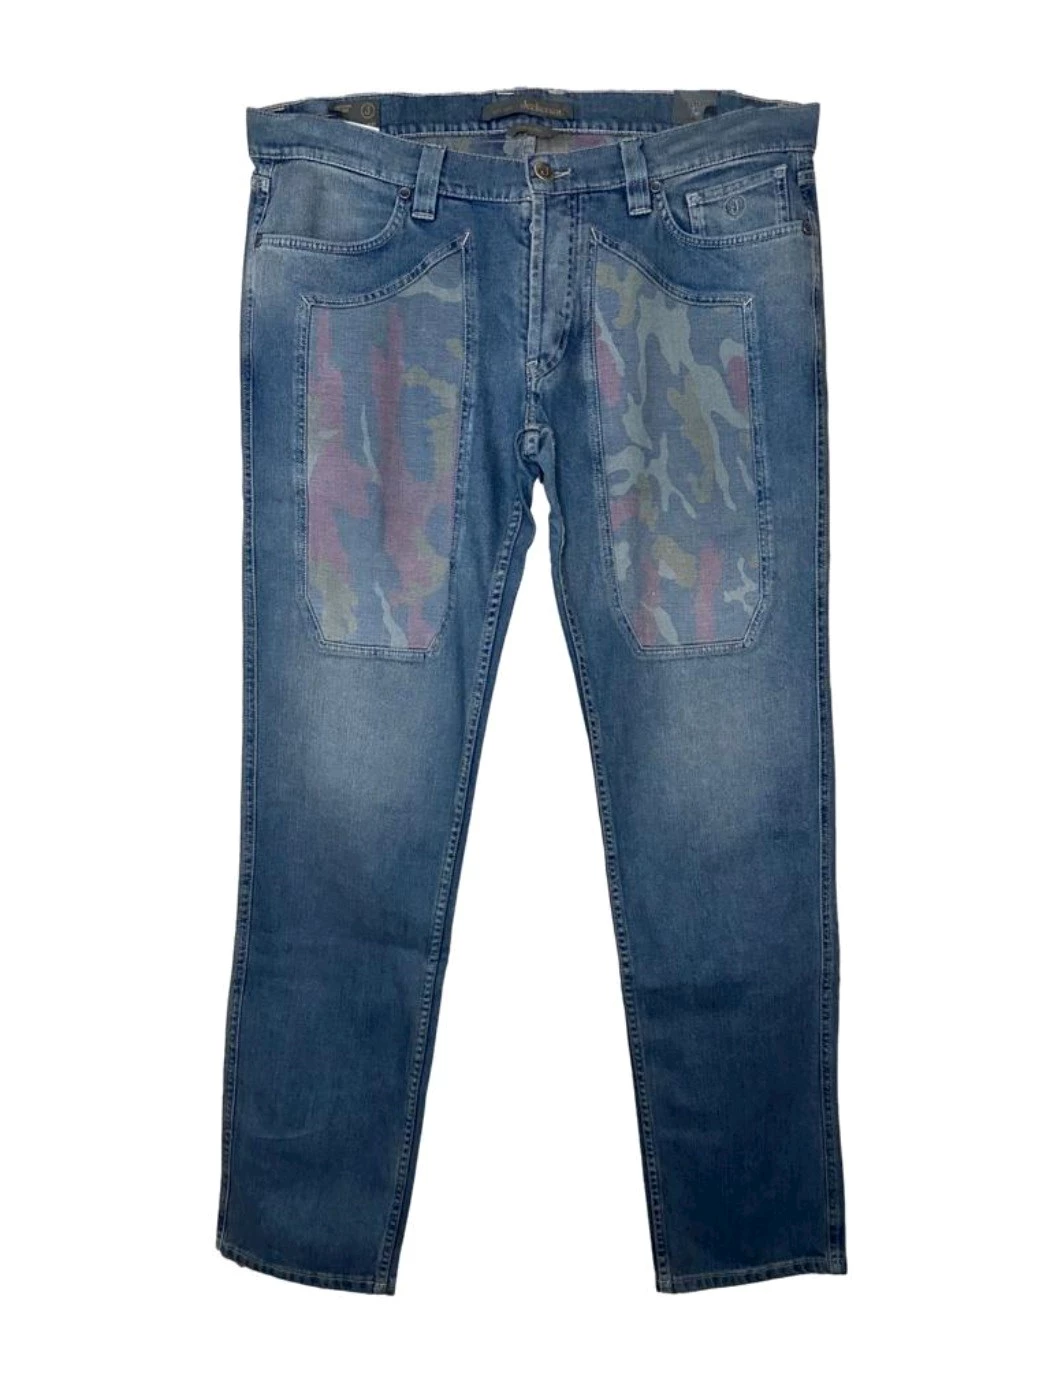 Denim jeans with Jeckerson patterned patch